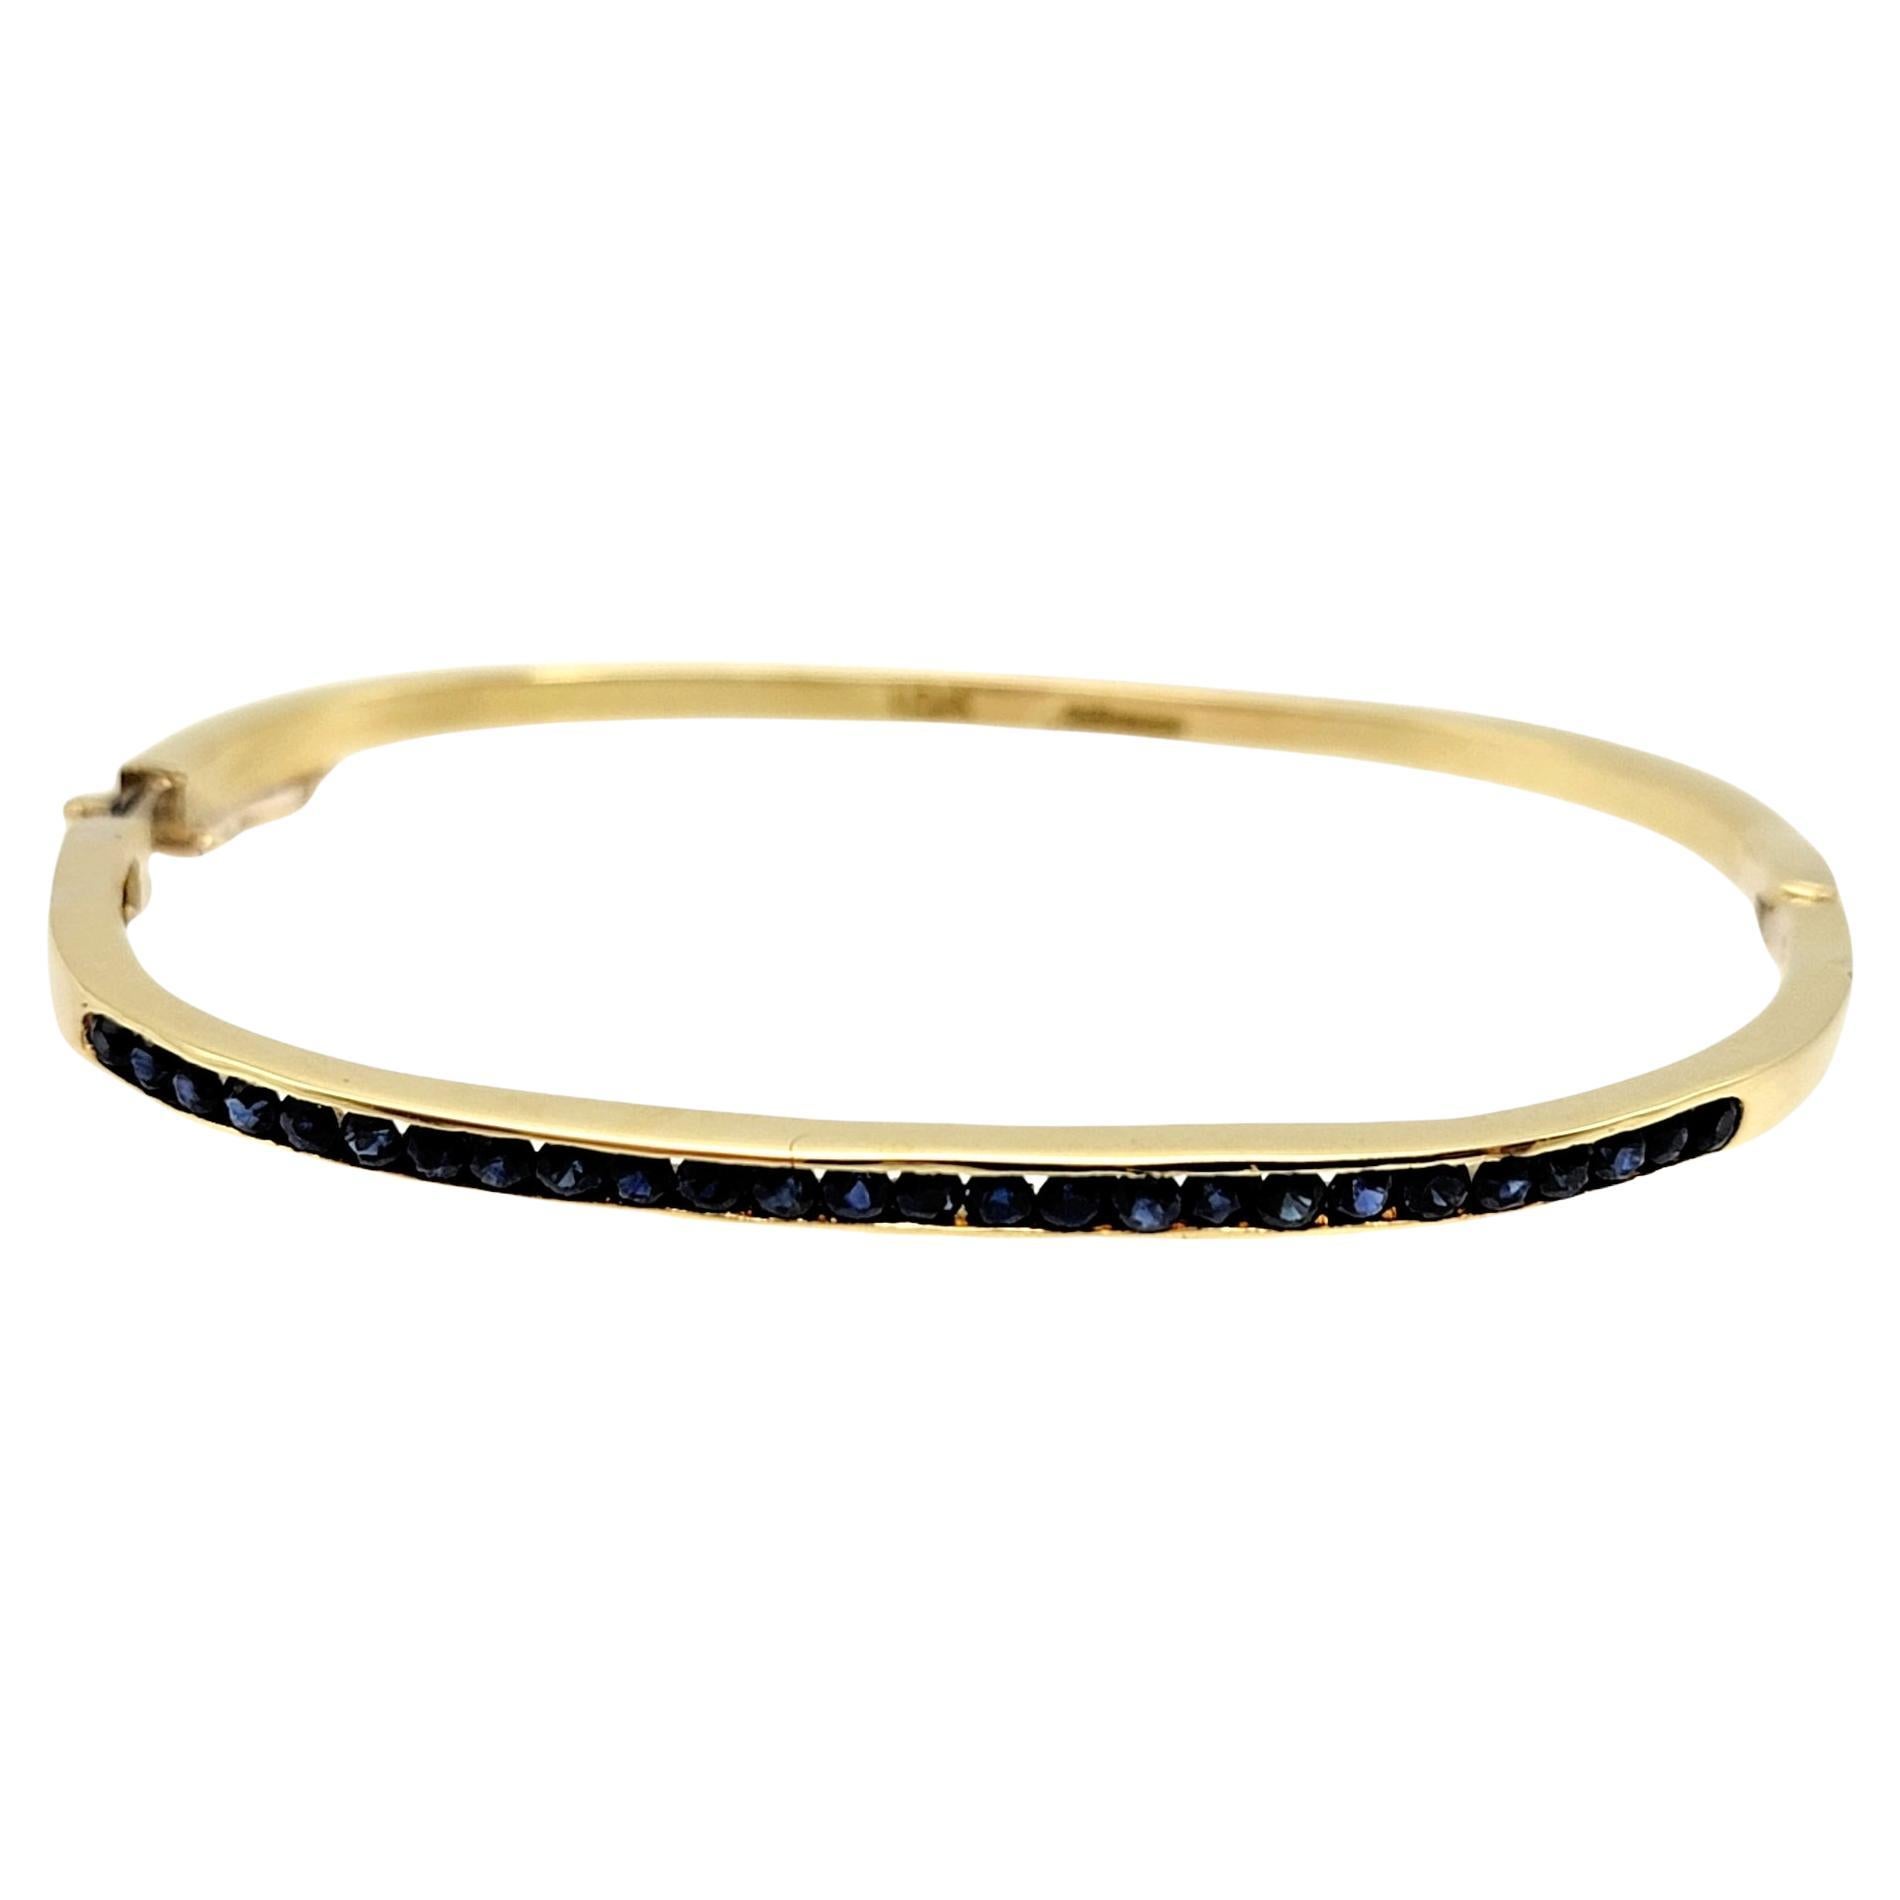 Delicate yellow gold bangle bracelet accented with a single elegant row of round channel set sapphires in a deep blue hue. 

Metal: 18K Yellow Gold
Natural Sapphires: 1.04 ctw
Sapphire cut: Round Brilliant
Sapphire color: Blue
Sapphire clarity: